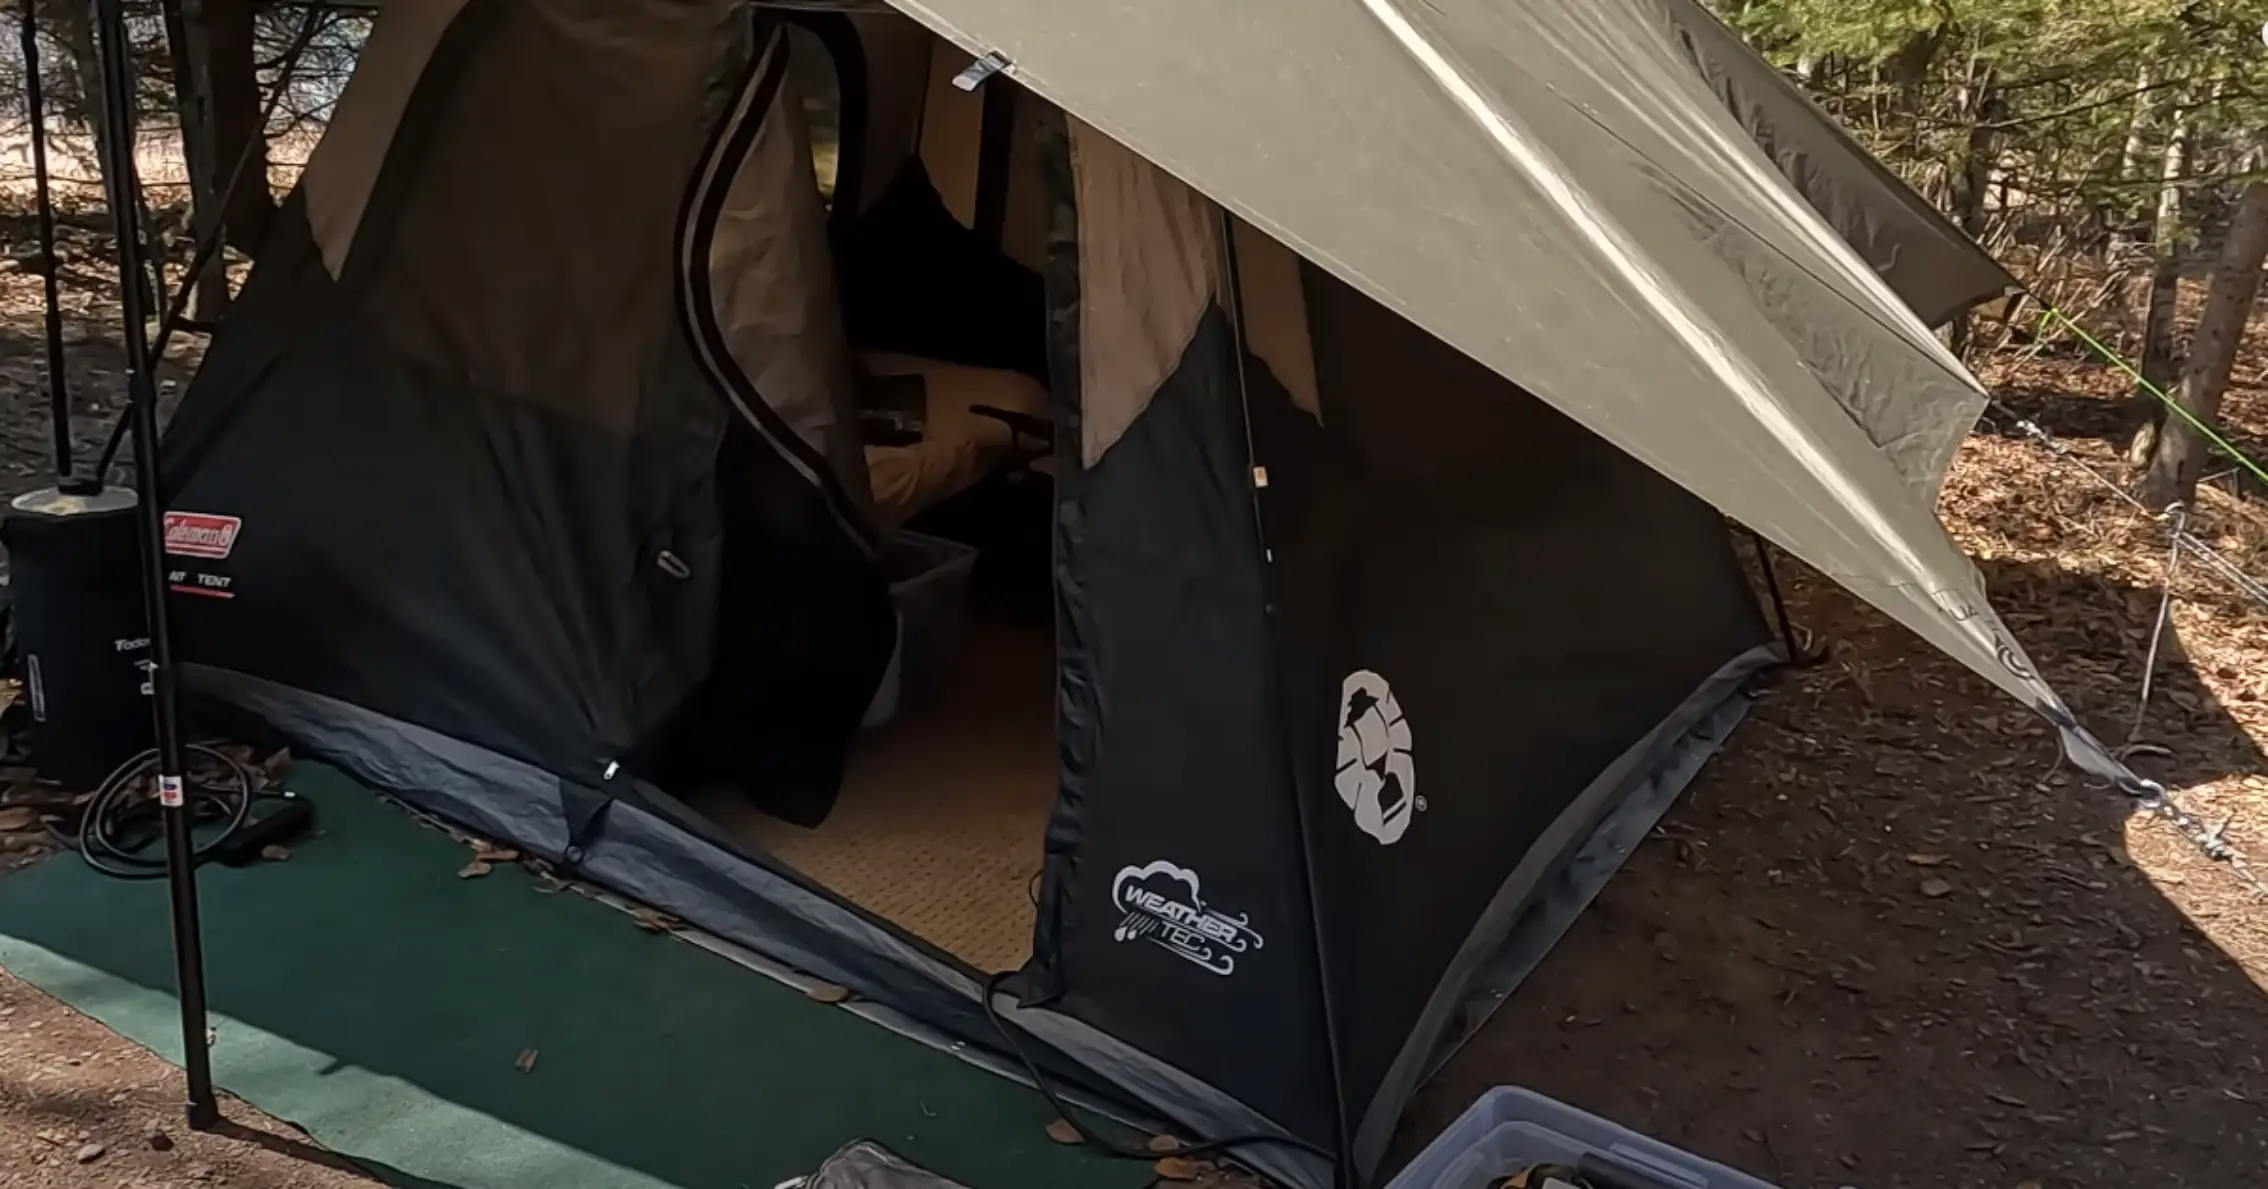 The 3 benefits of using a tarp over my tent